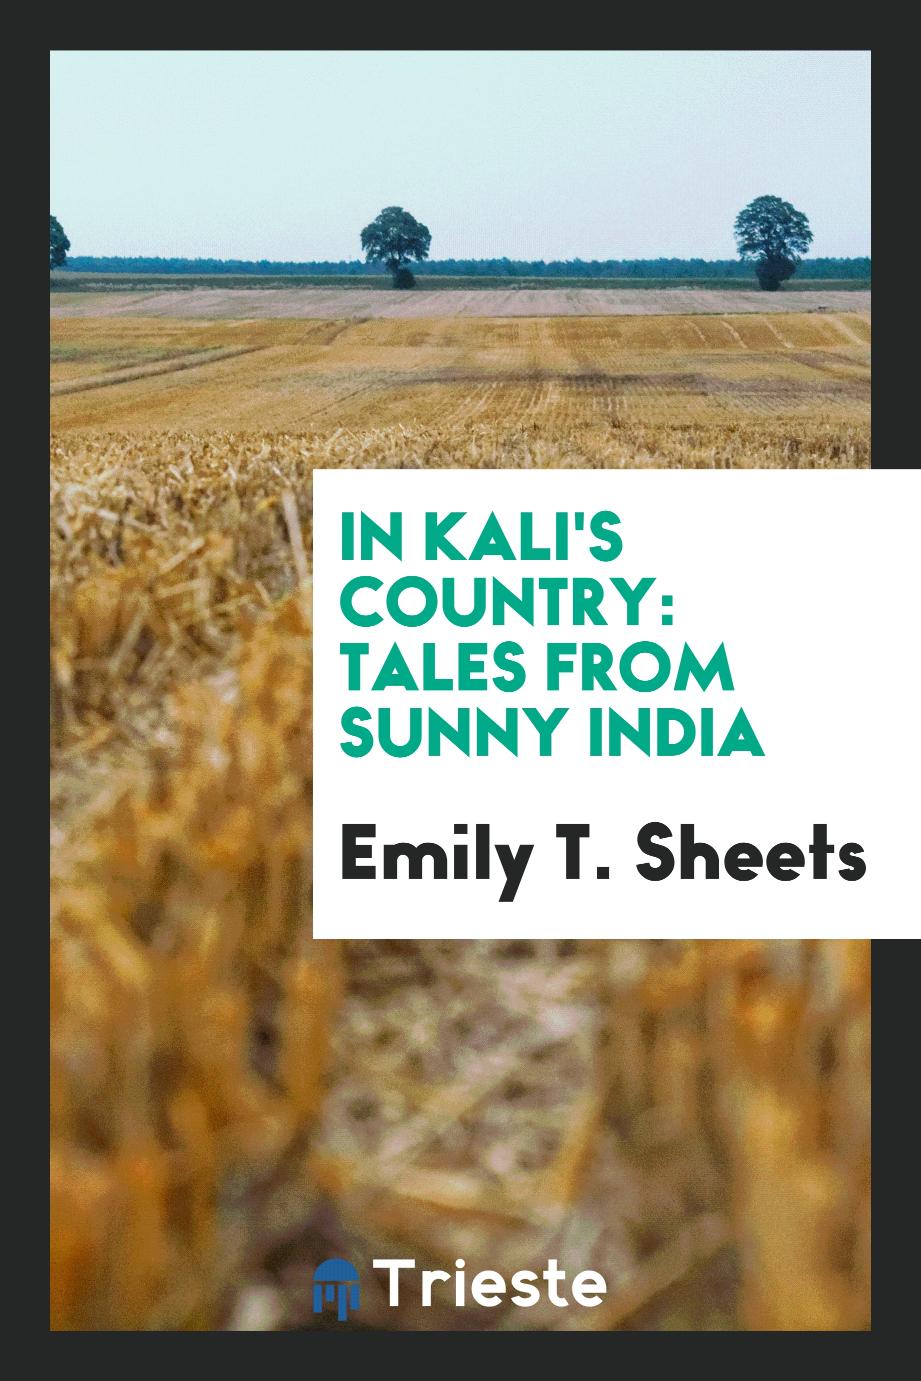 In Kali's country: tales from sunny India